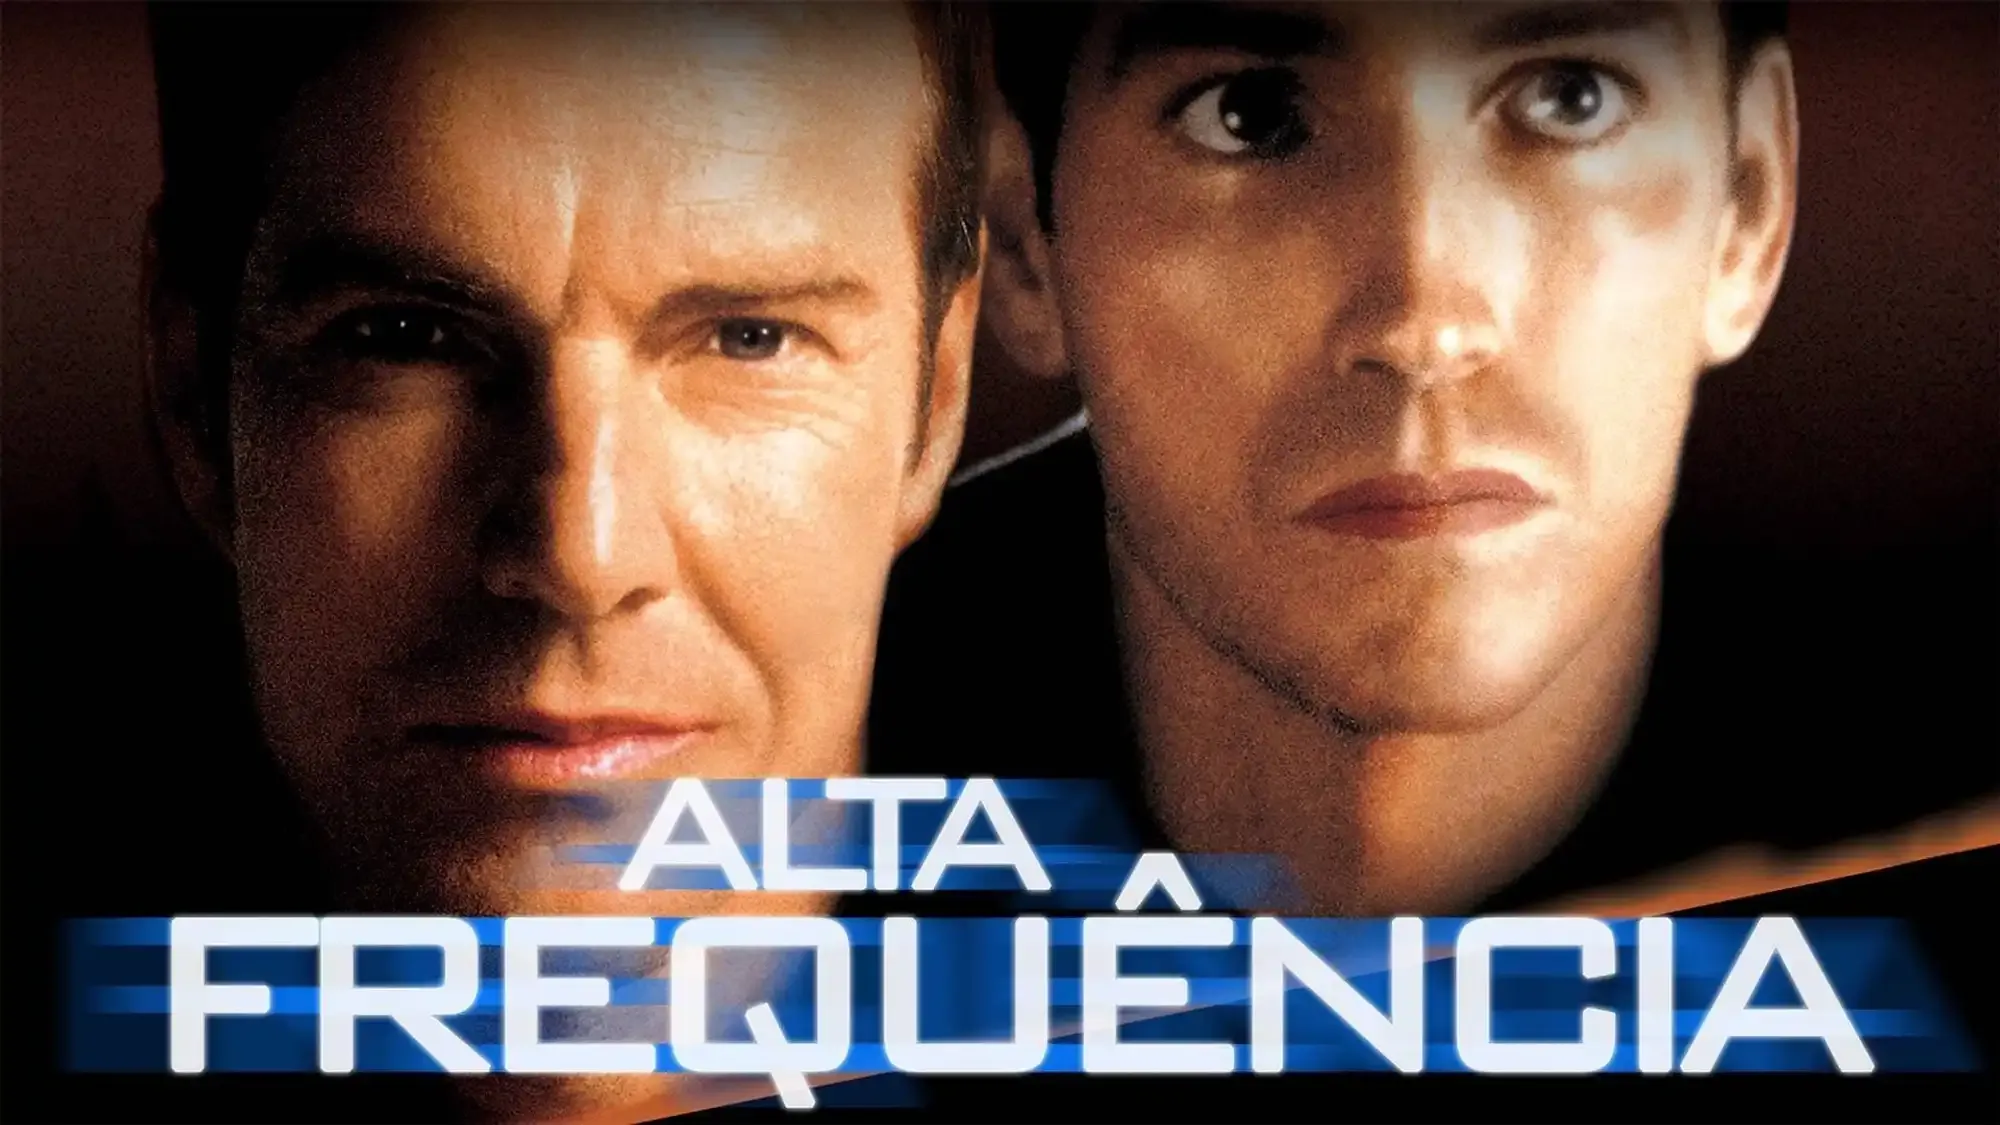 Frequency movie review